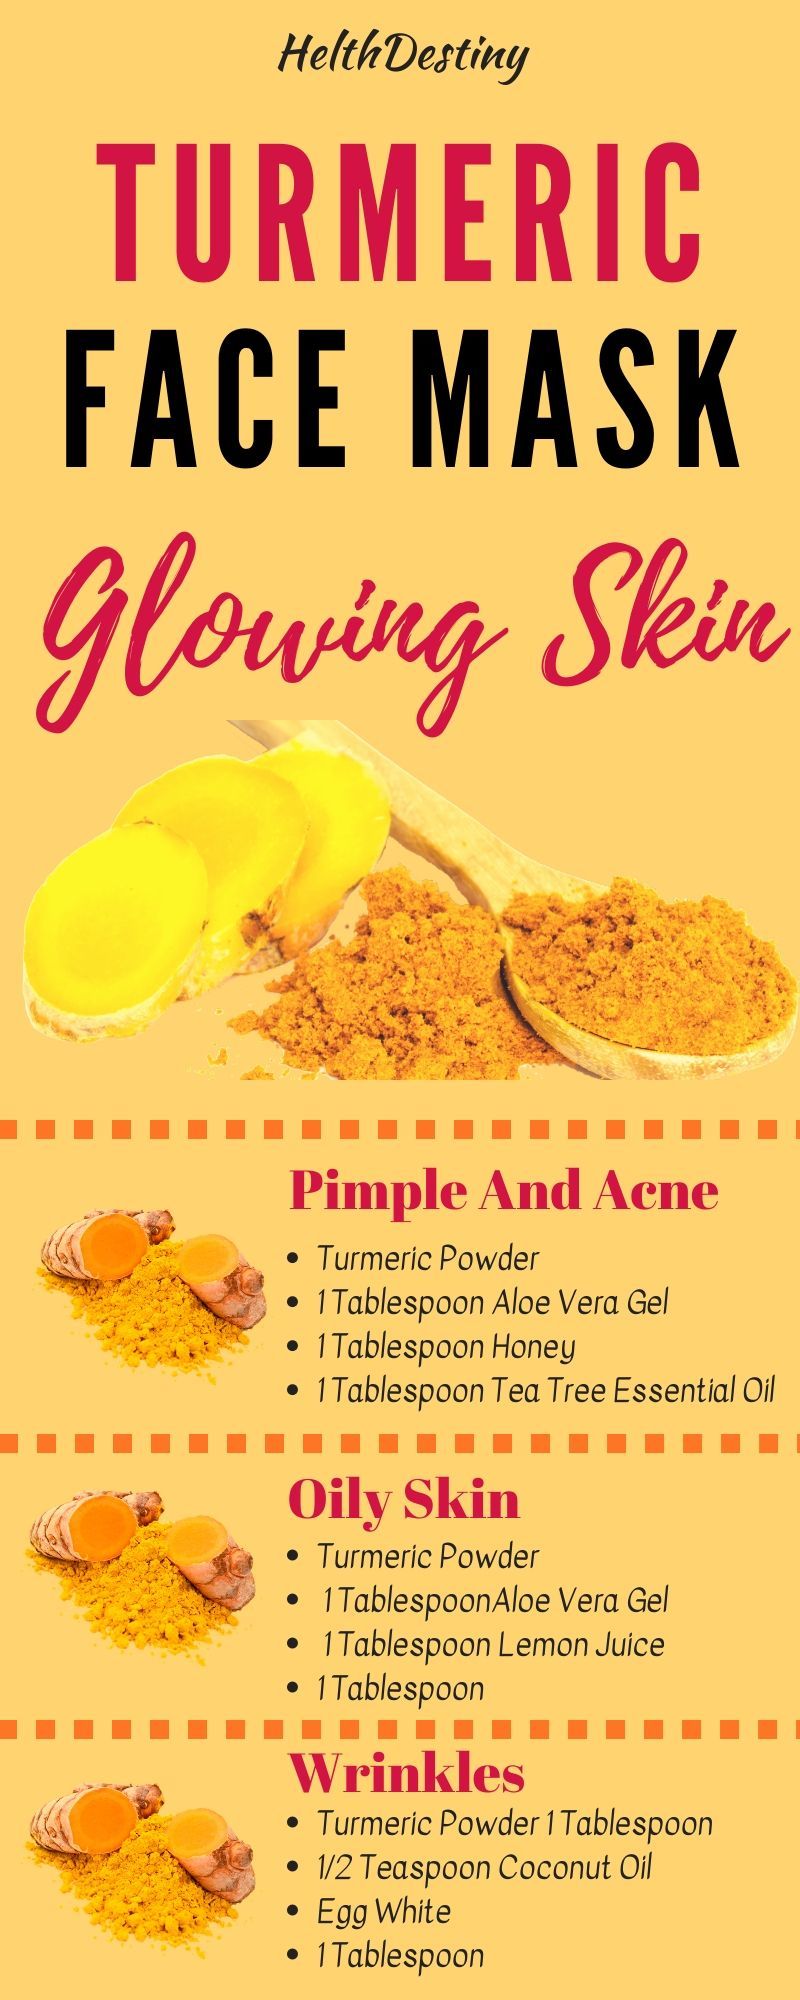 Acne And Oily Skin Turmeric Face Mask